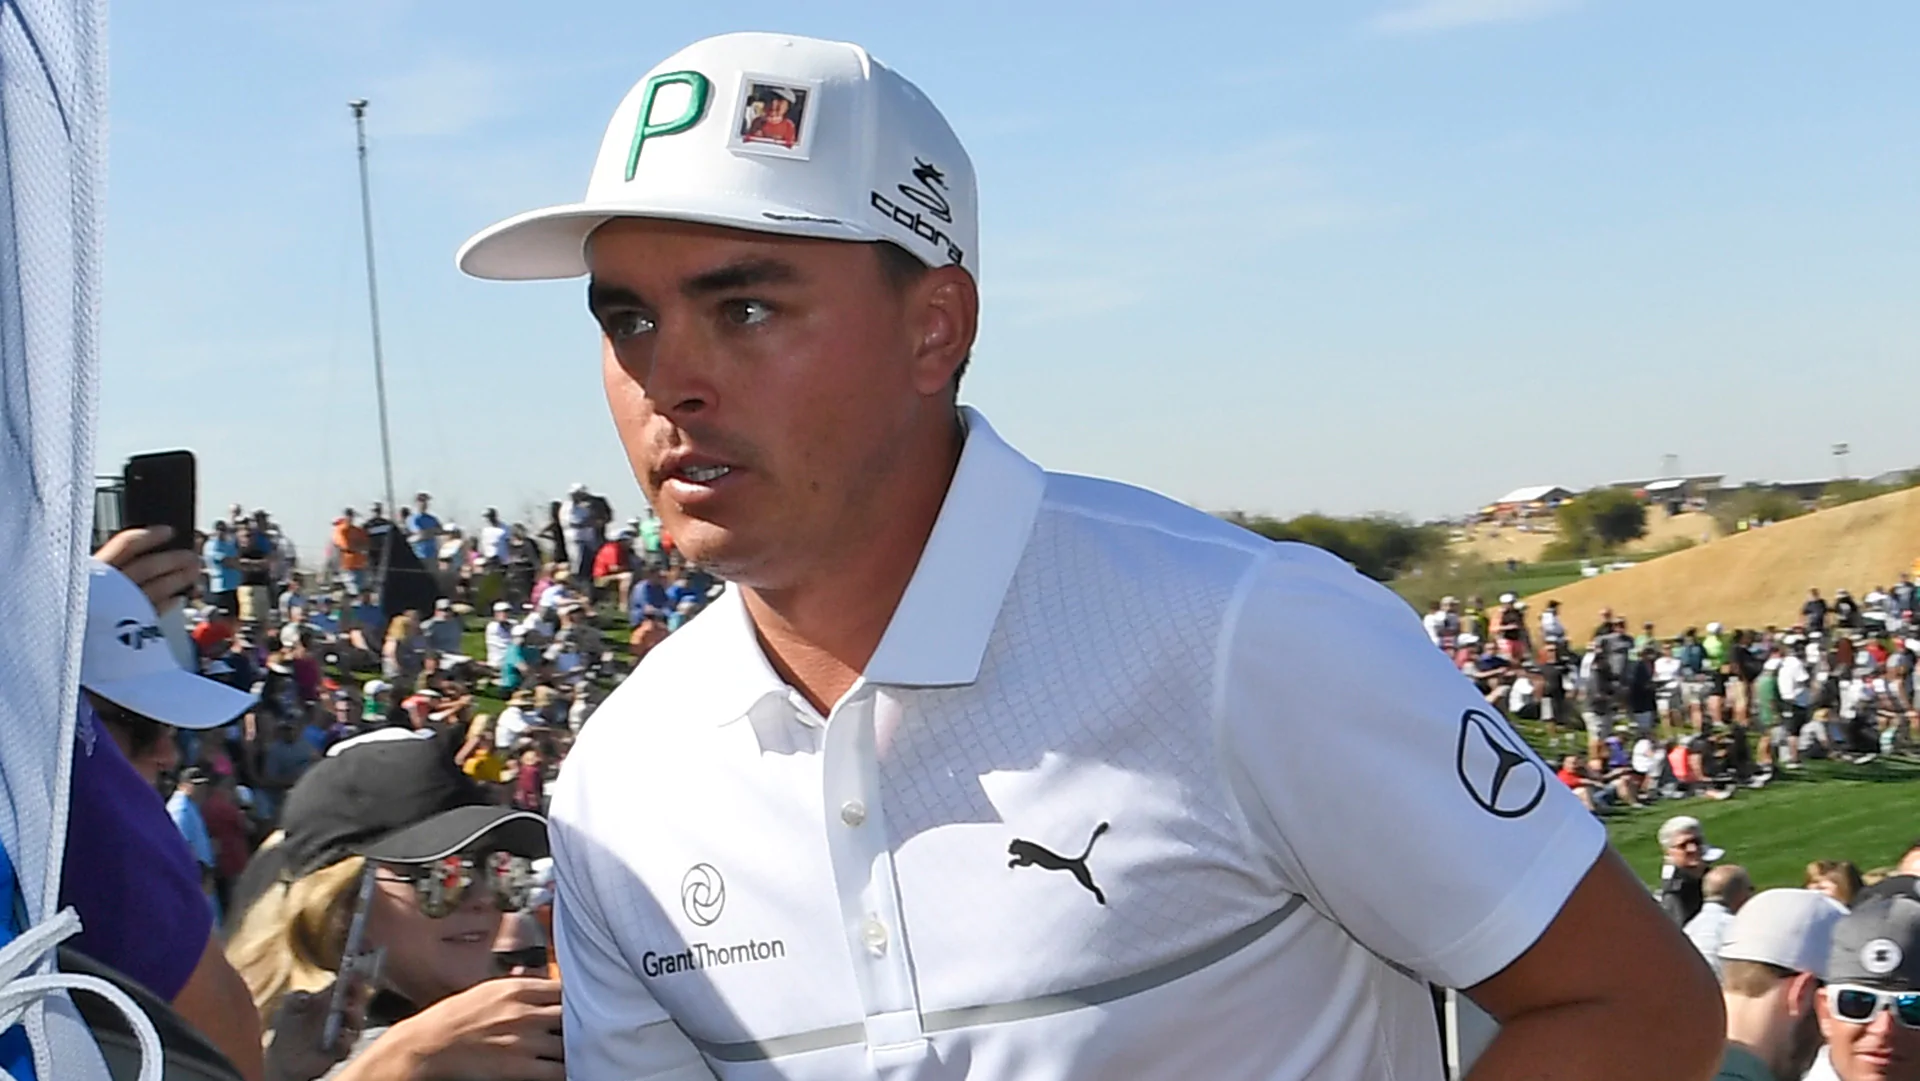 Fowler honoring deceased young fan at WMPO